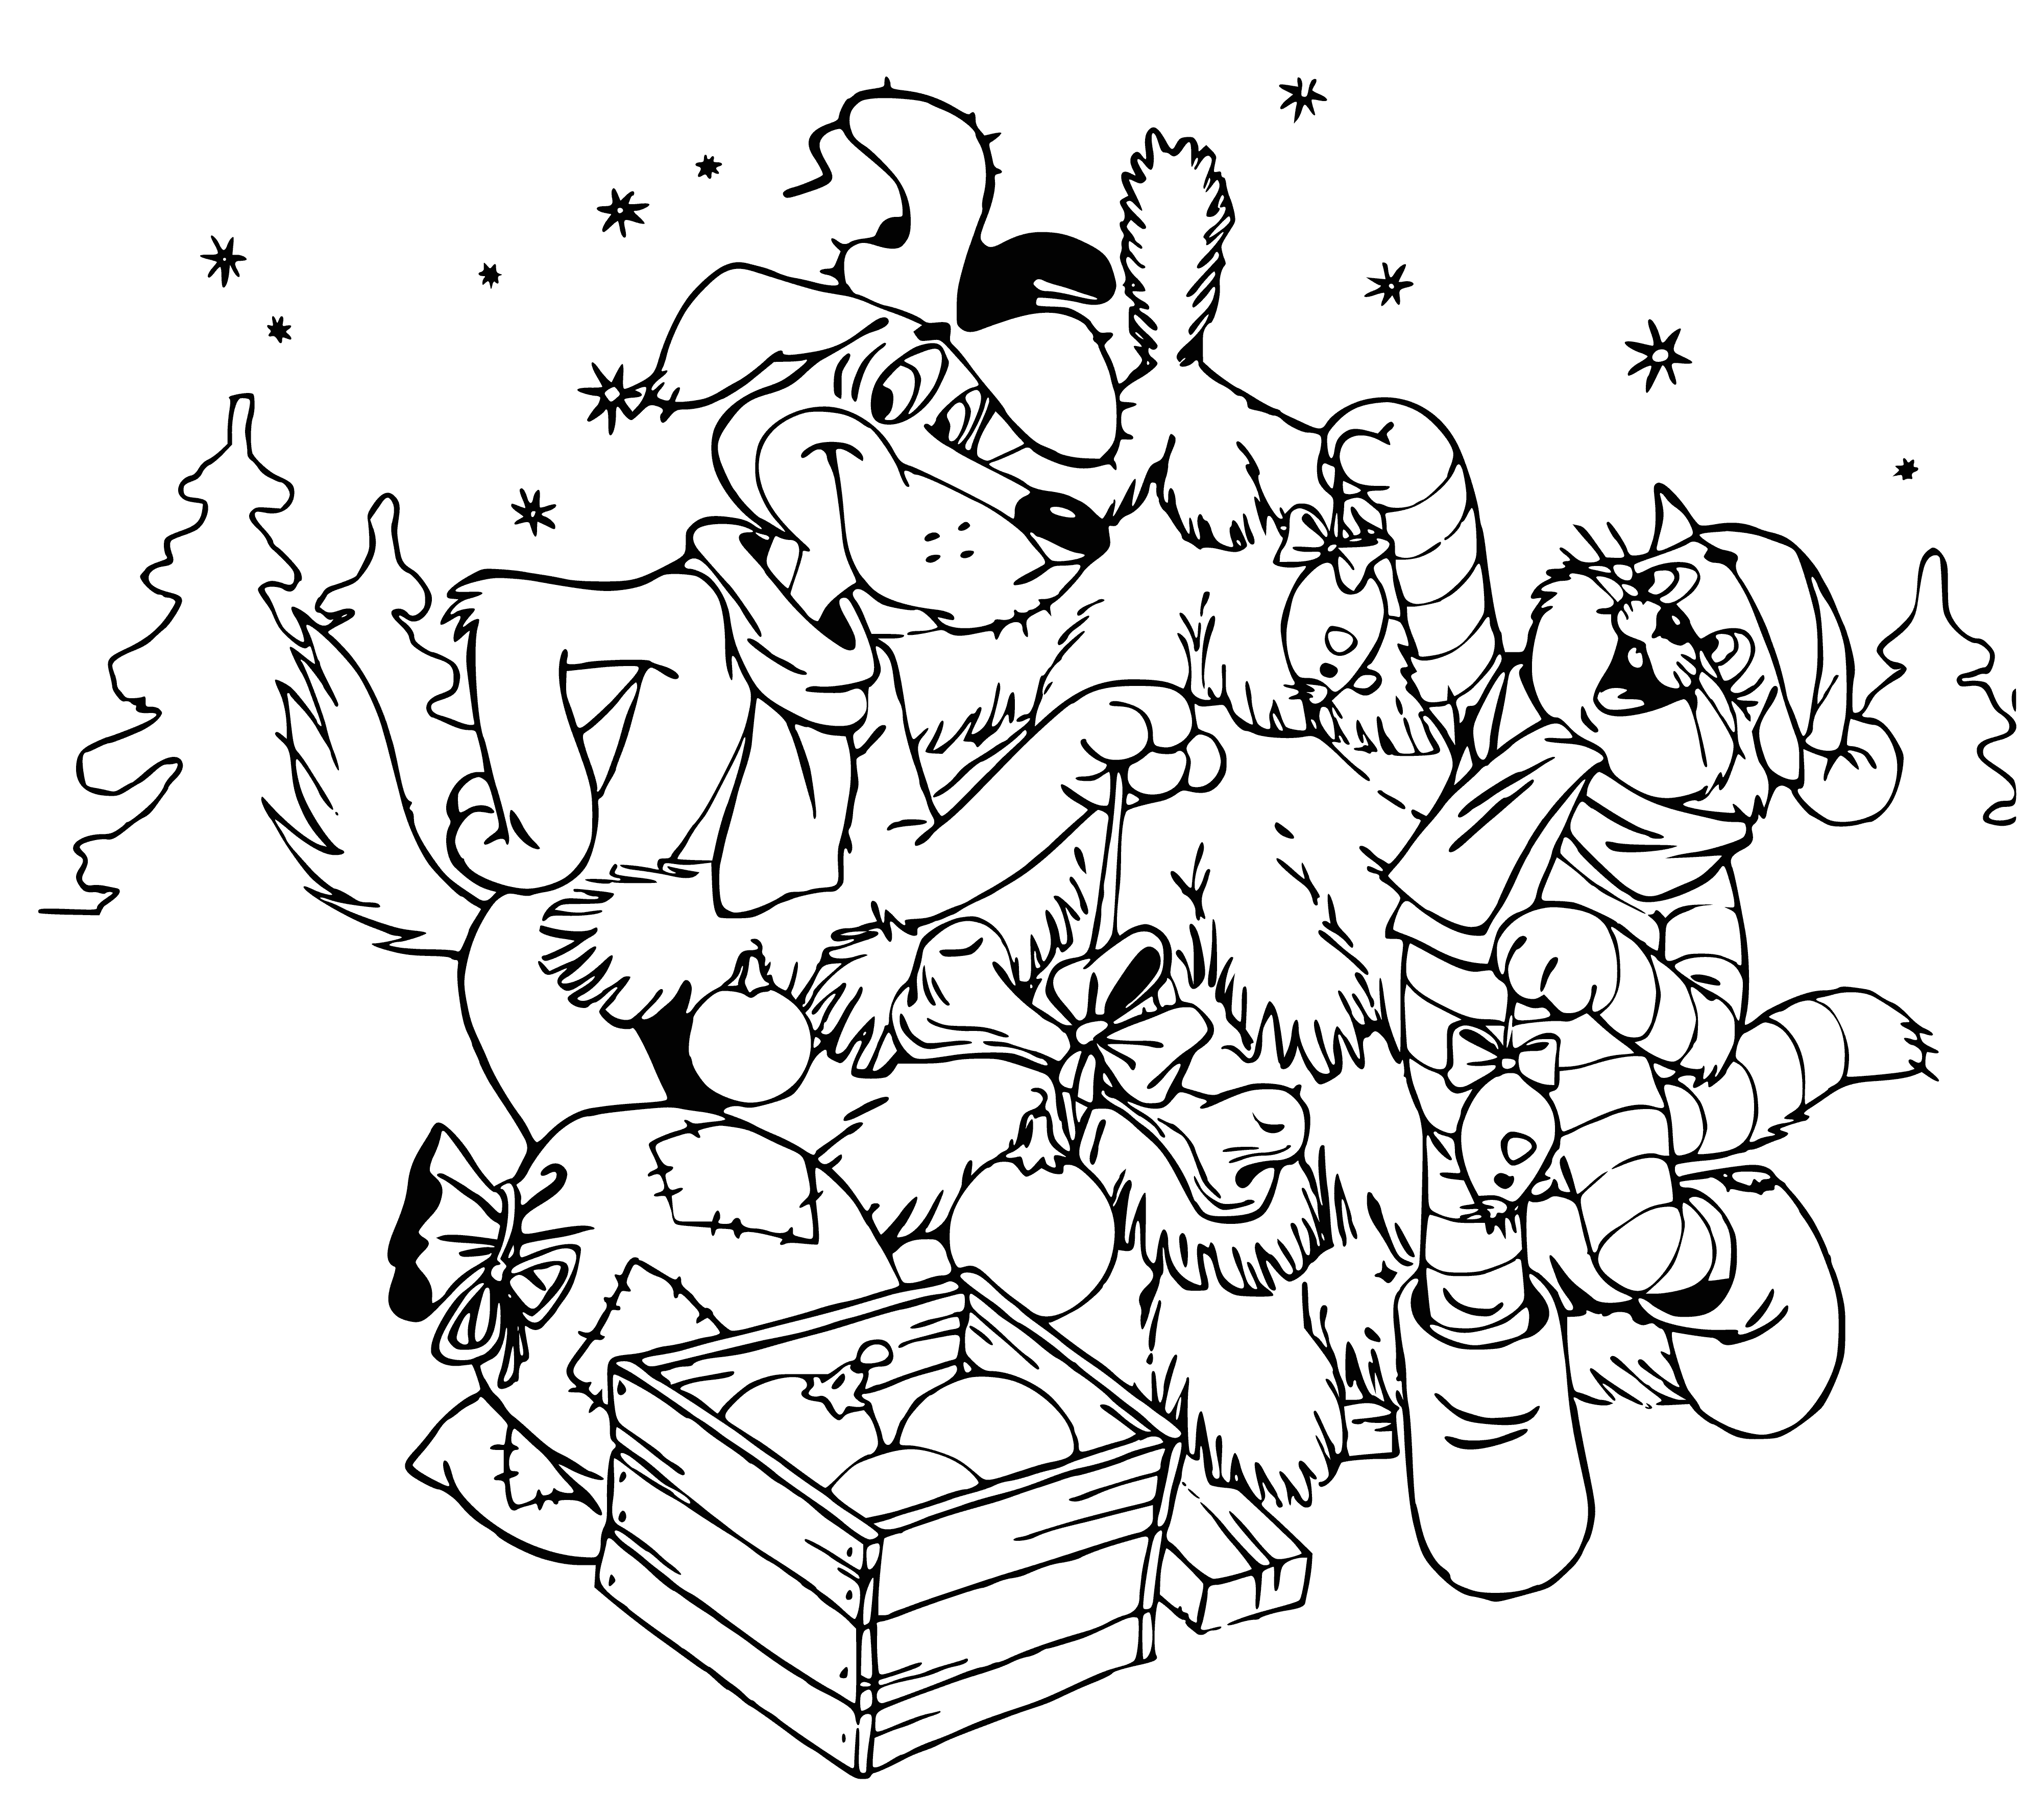 coloring page: Animals decorate a Christmas tree with bows, garlands, star & lights to make it look festive.